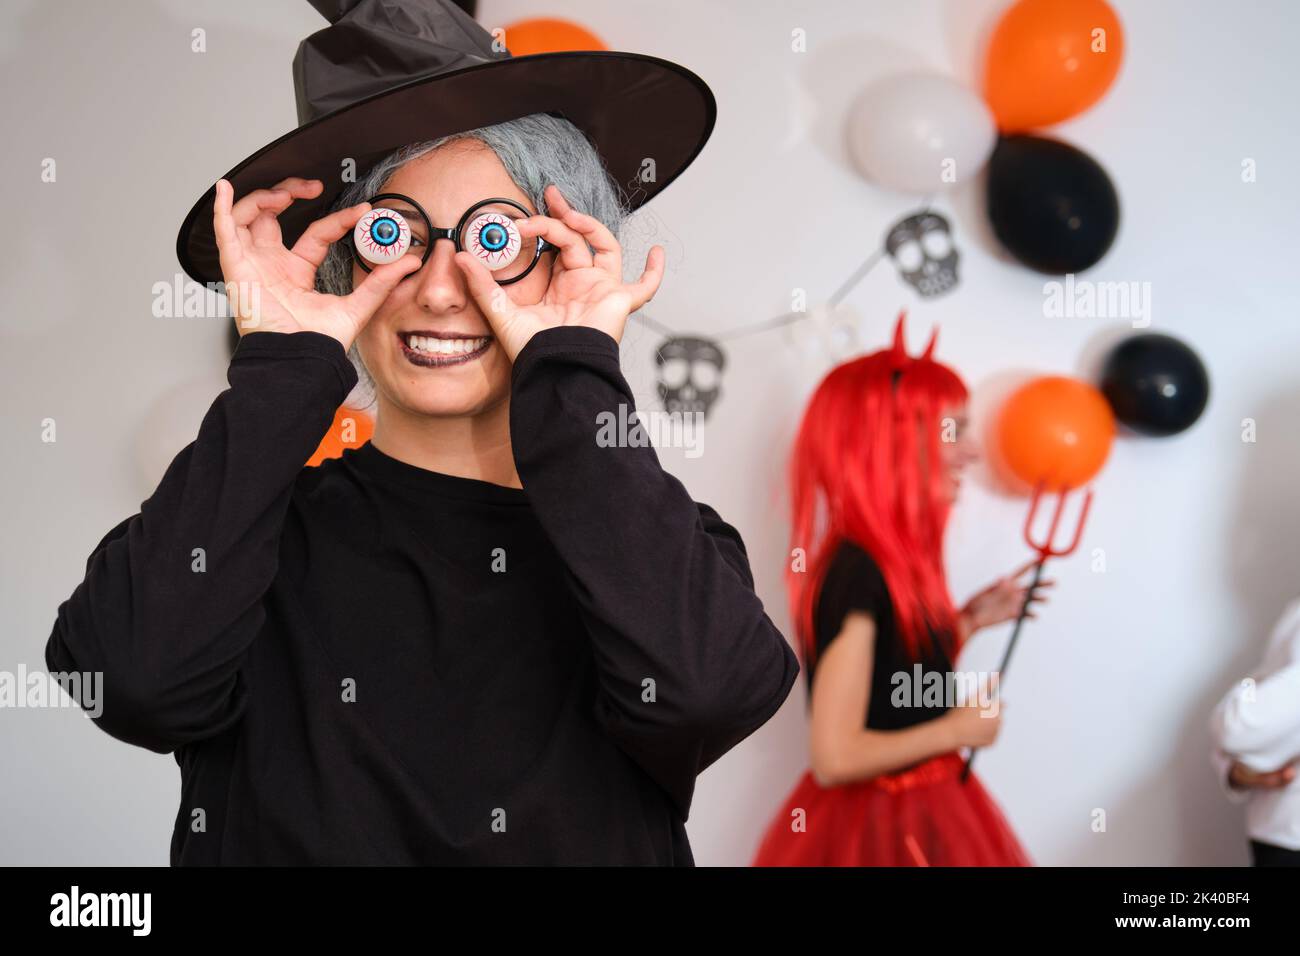 Woman dressed as witch holding eyeballs over her eyes at Halloween party. Stock Photo